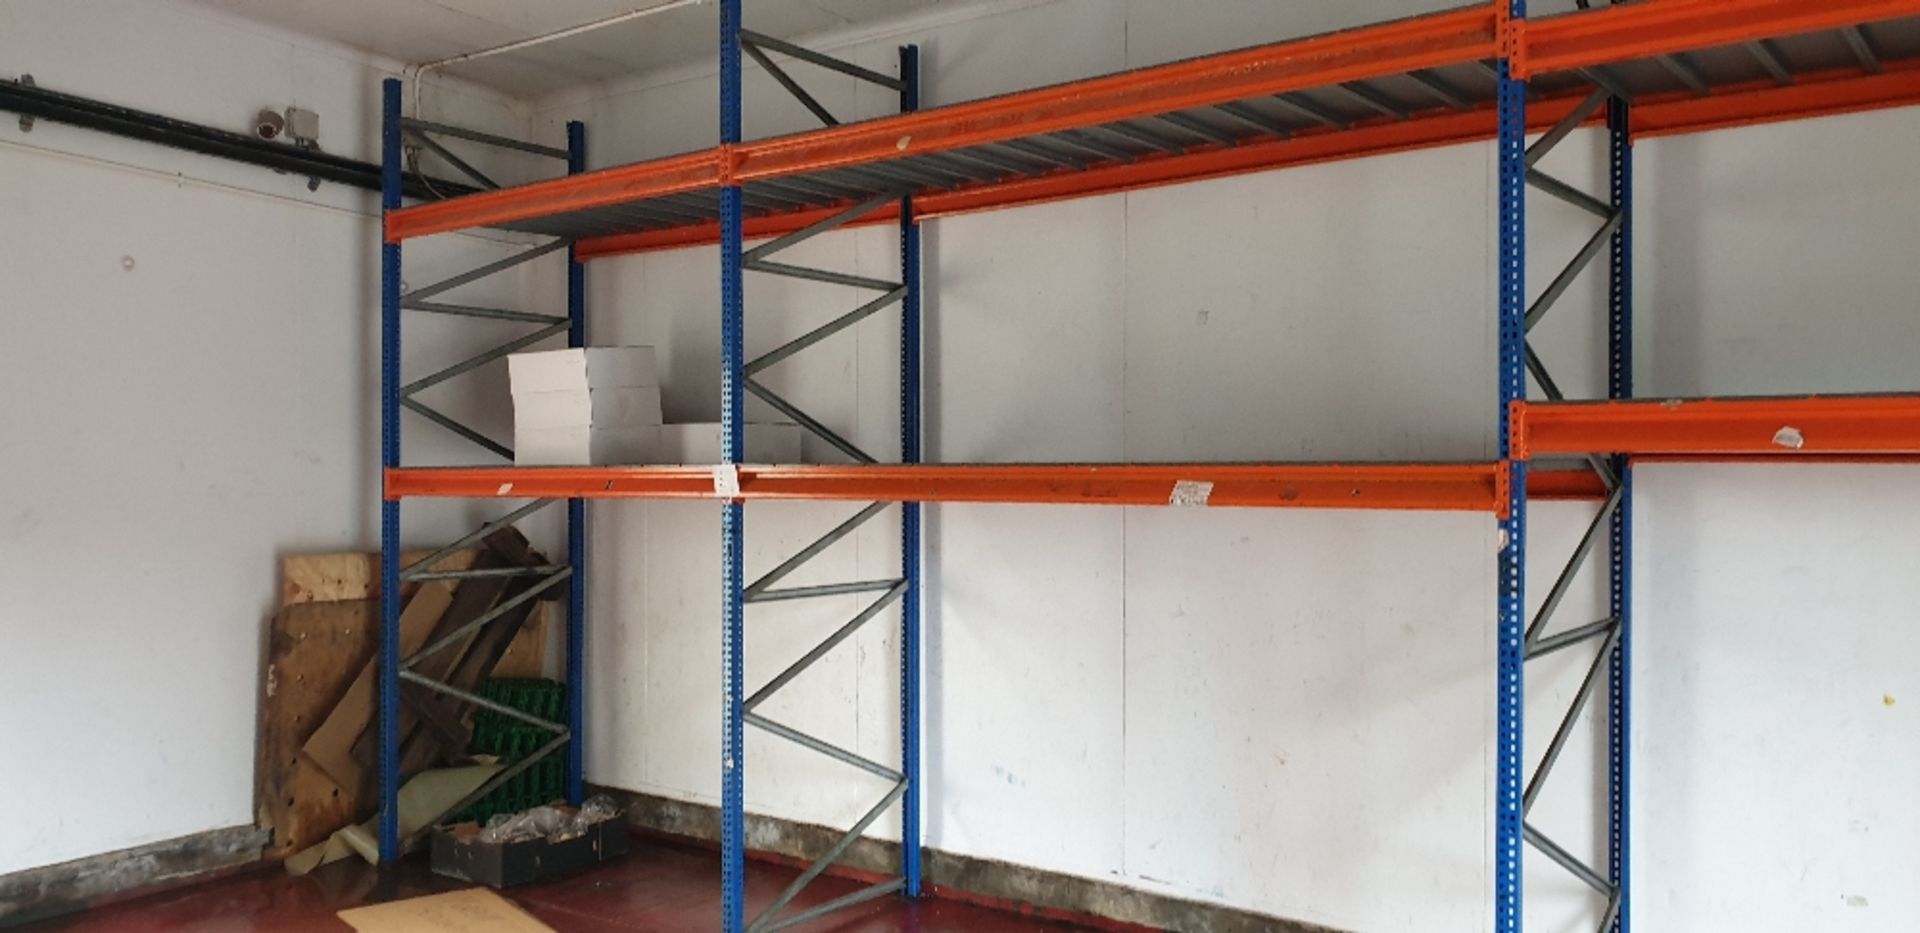 4 - Bays of pallet racking with steel panel shelving